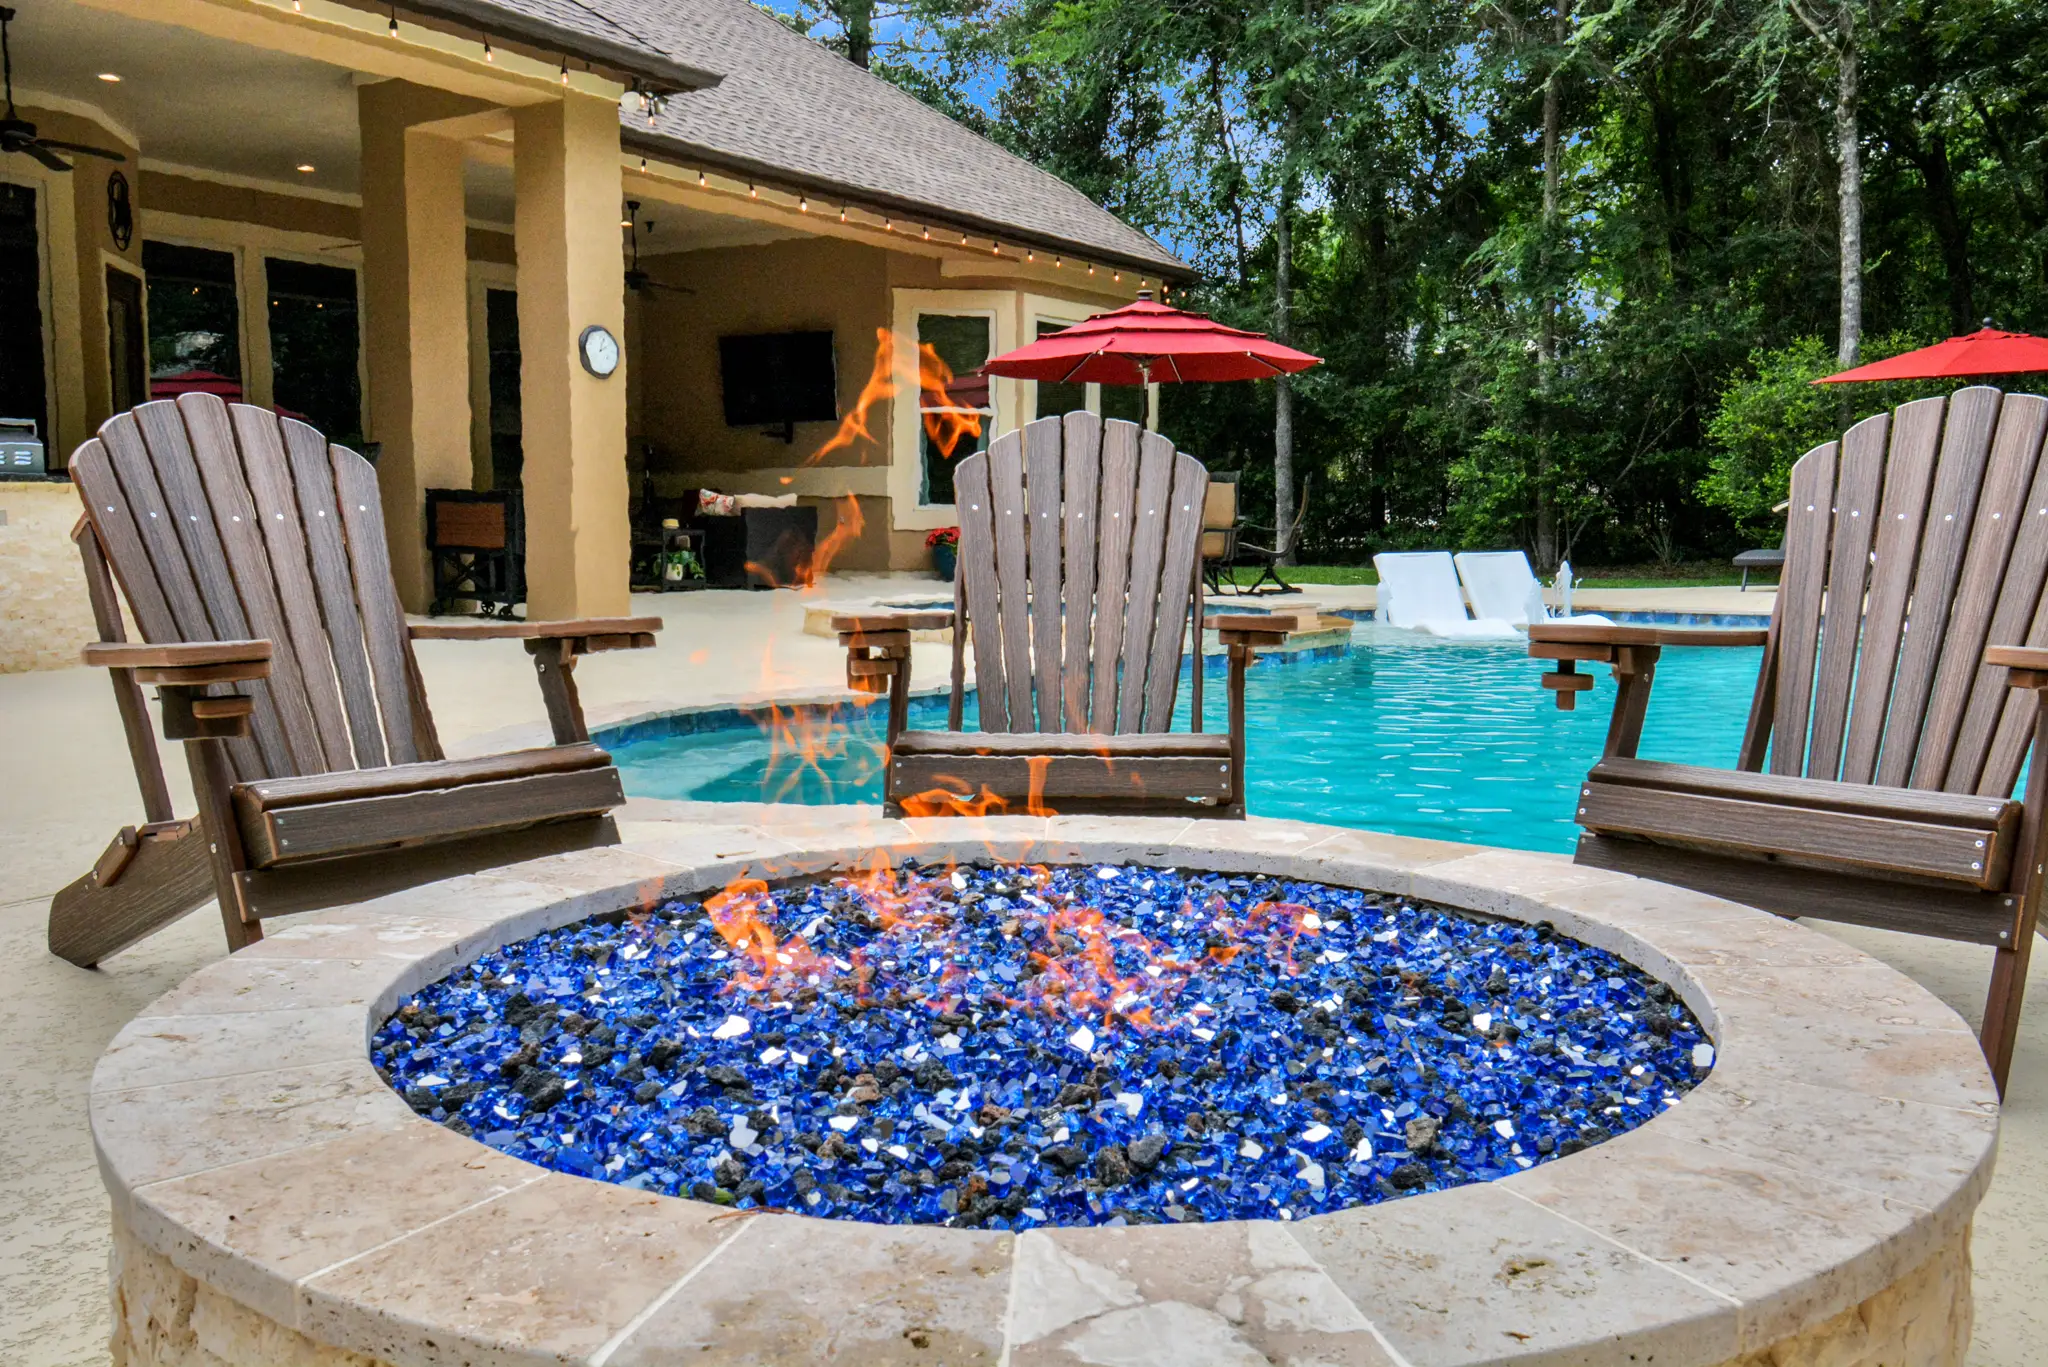 Fire Pits & Fire Features